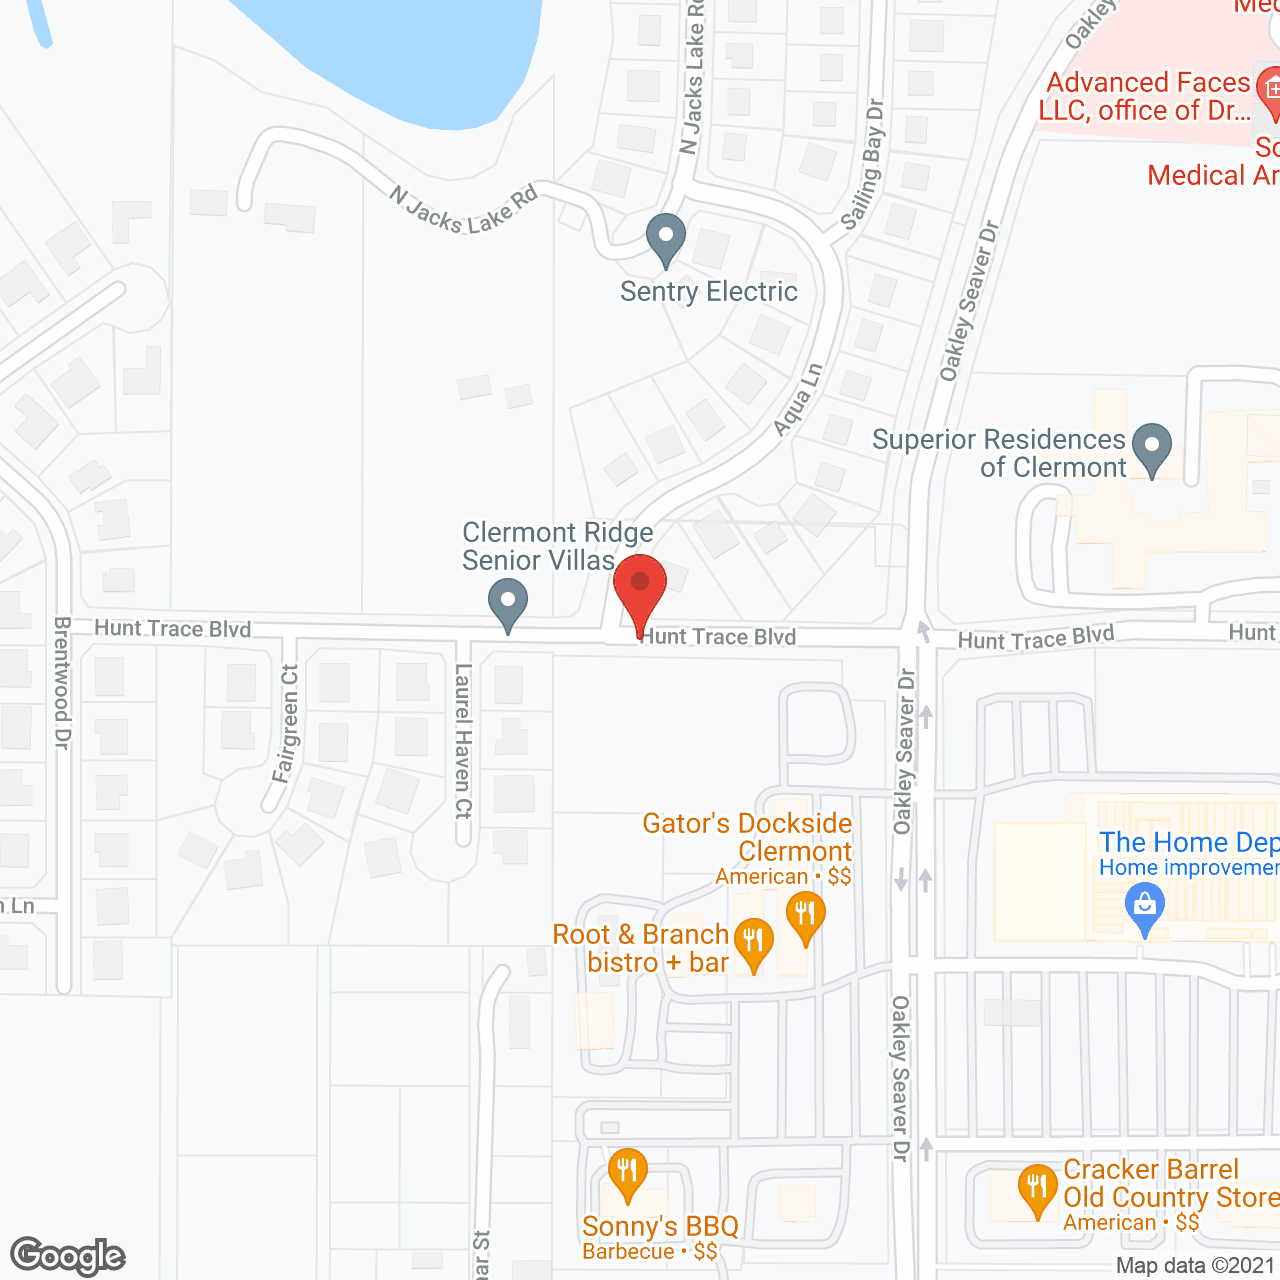 Superior Residences of Clermont in google map